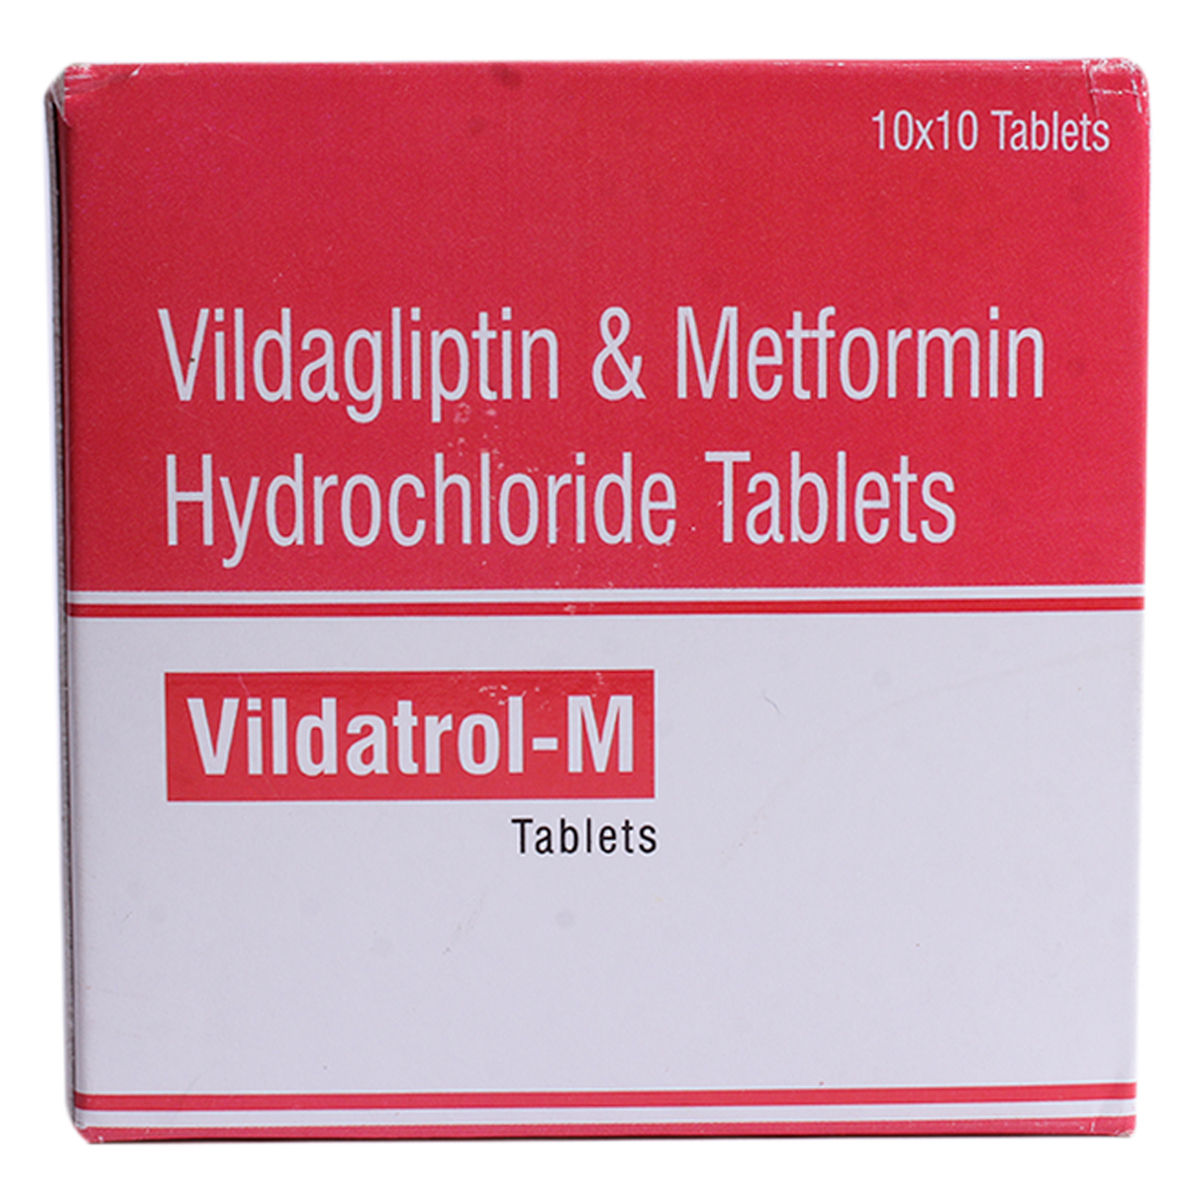 Vildatrol-M Tablet | Uses, Side Effects, Price | Apollo Pharmacy